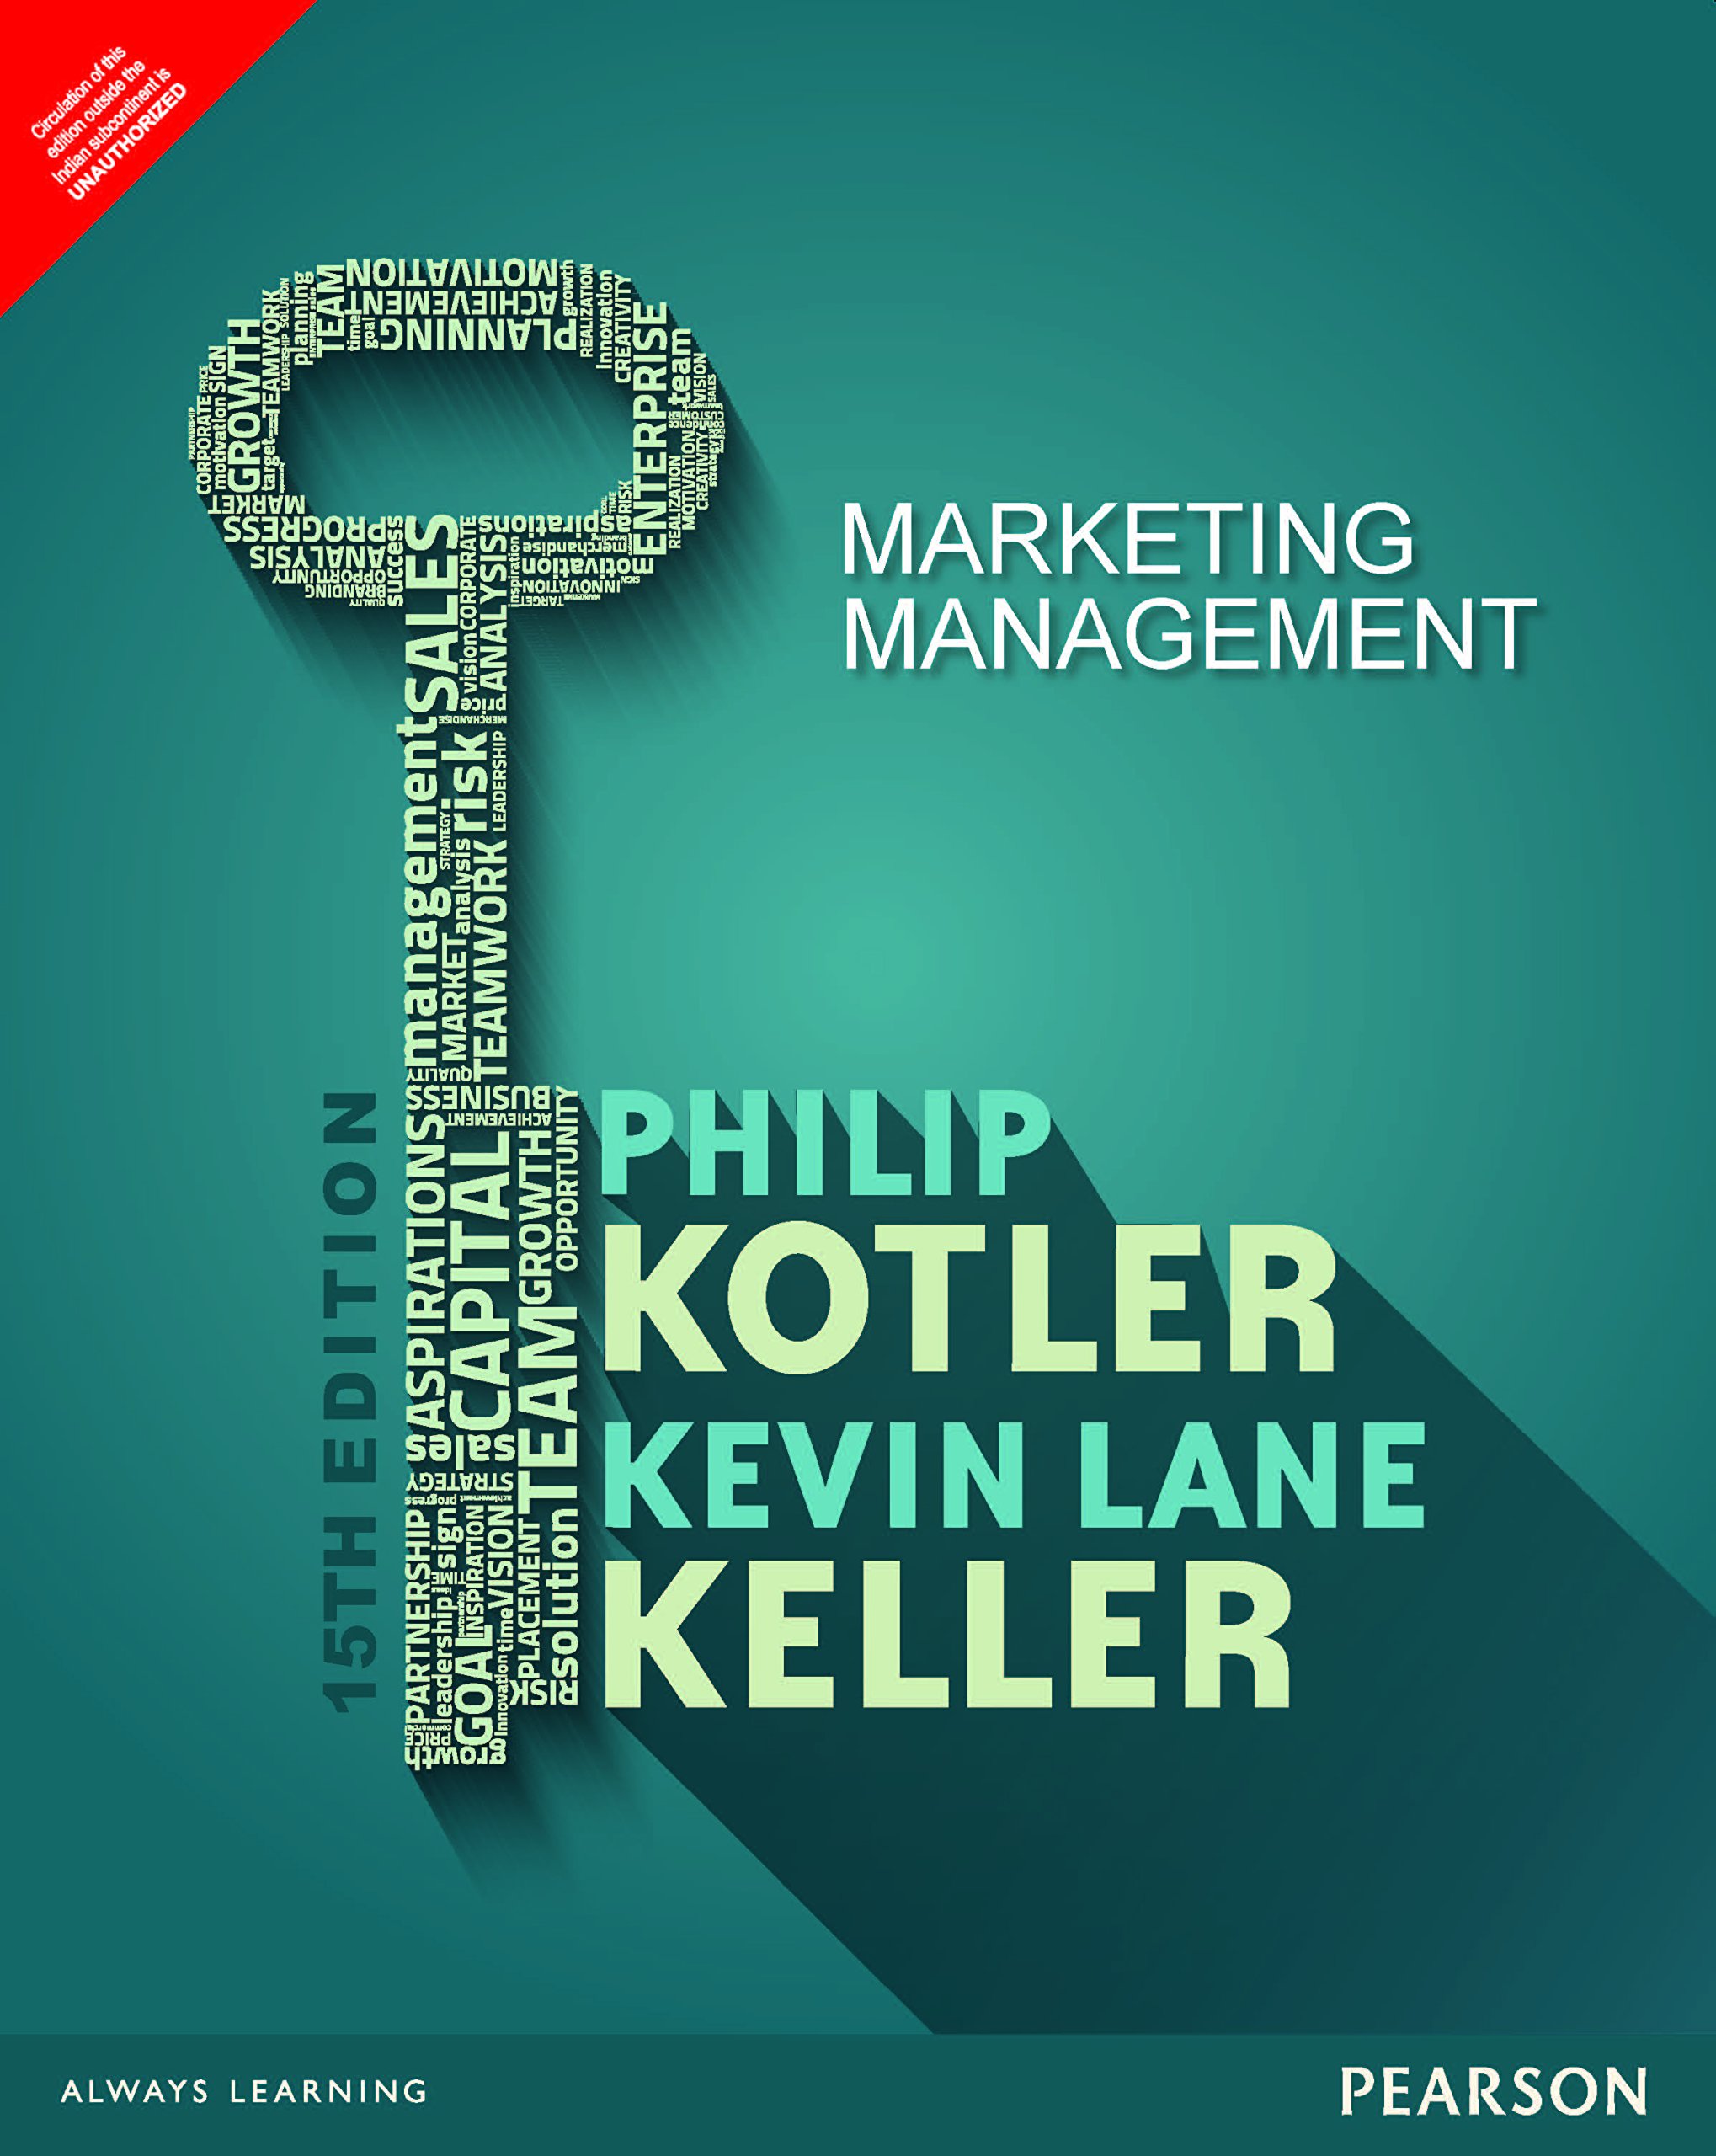 Marketing Management Book's cover photo by Kotler